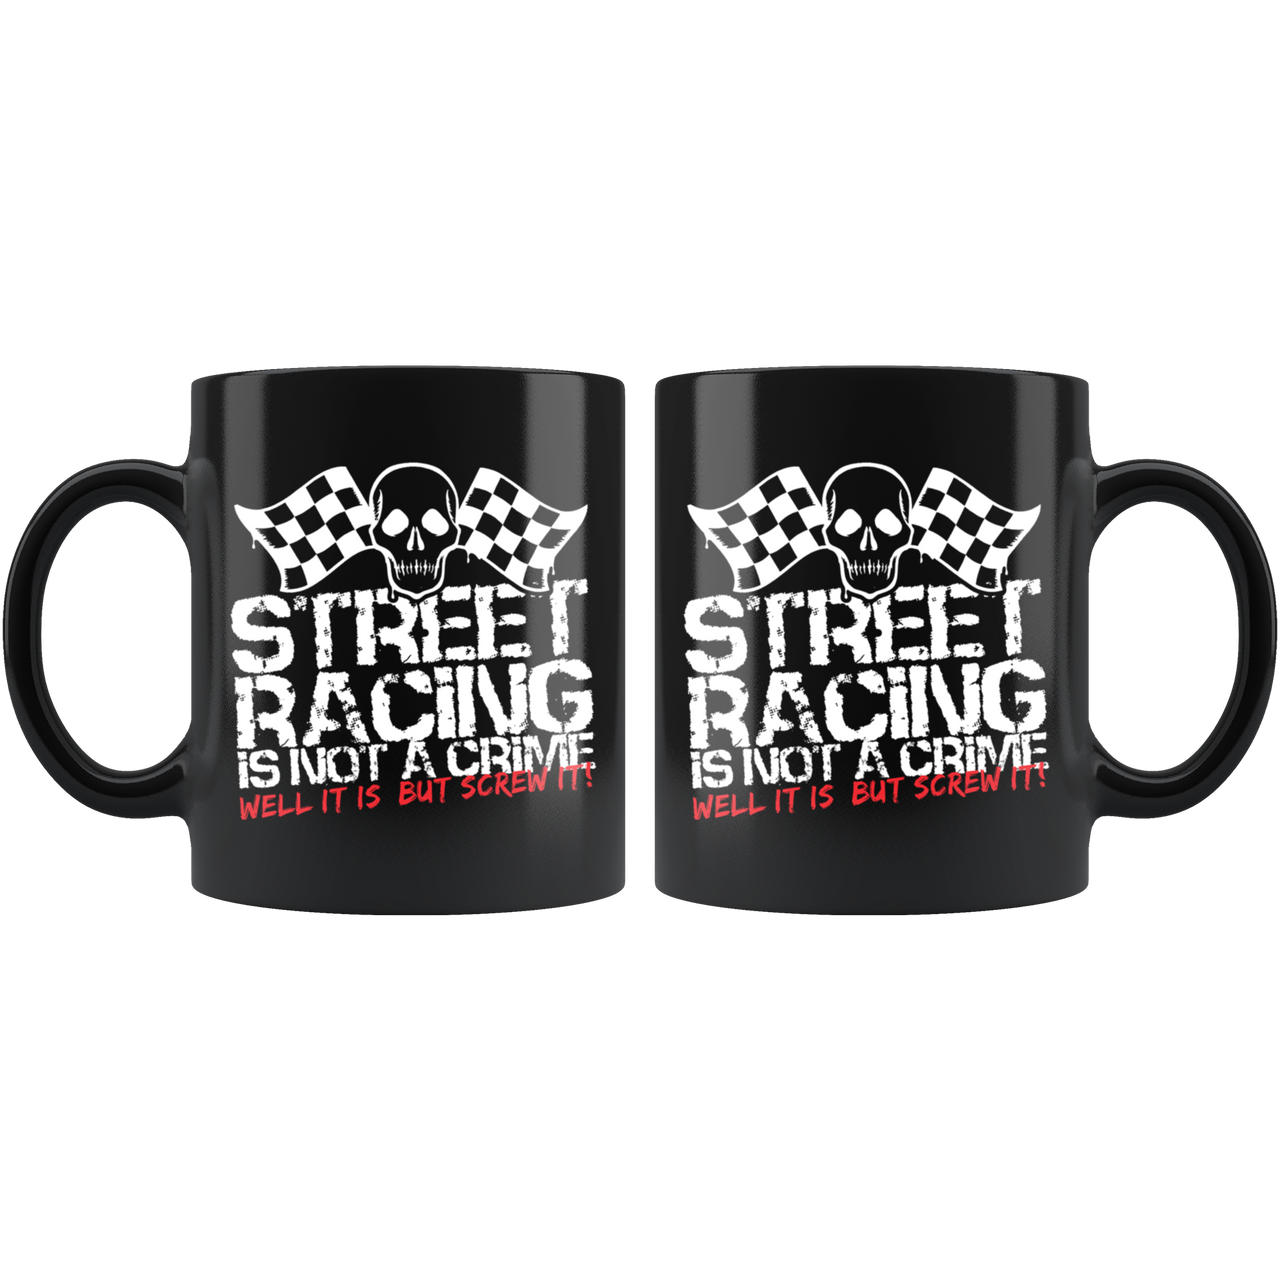 Street Racing Is Not A Crime Well it Is But Screw It Mug!